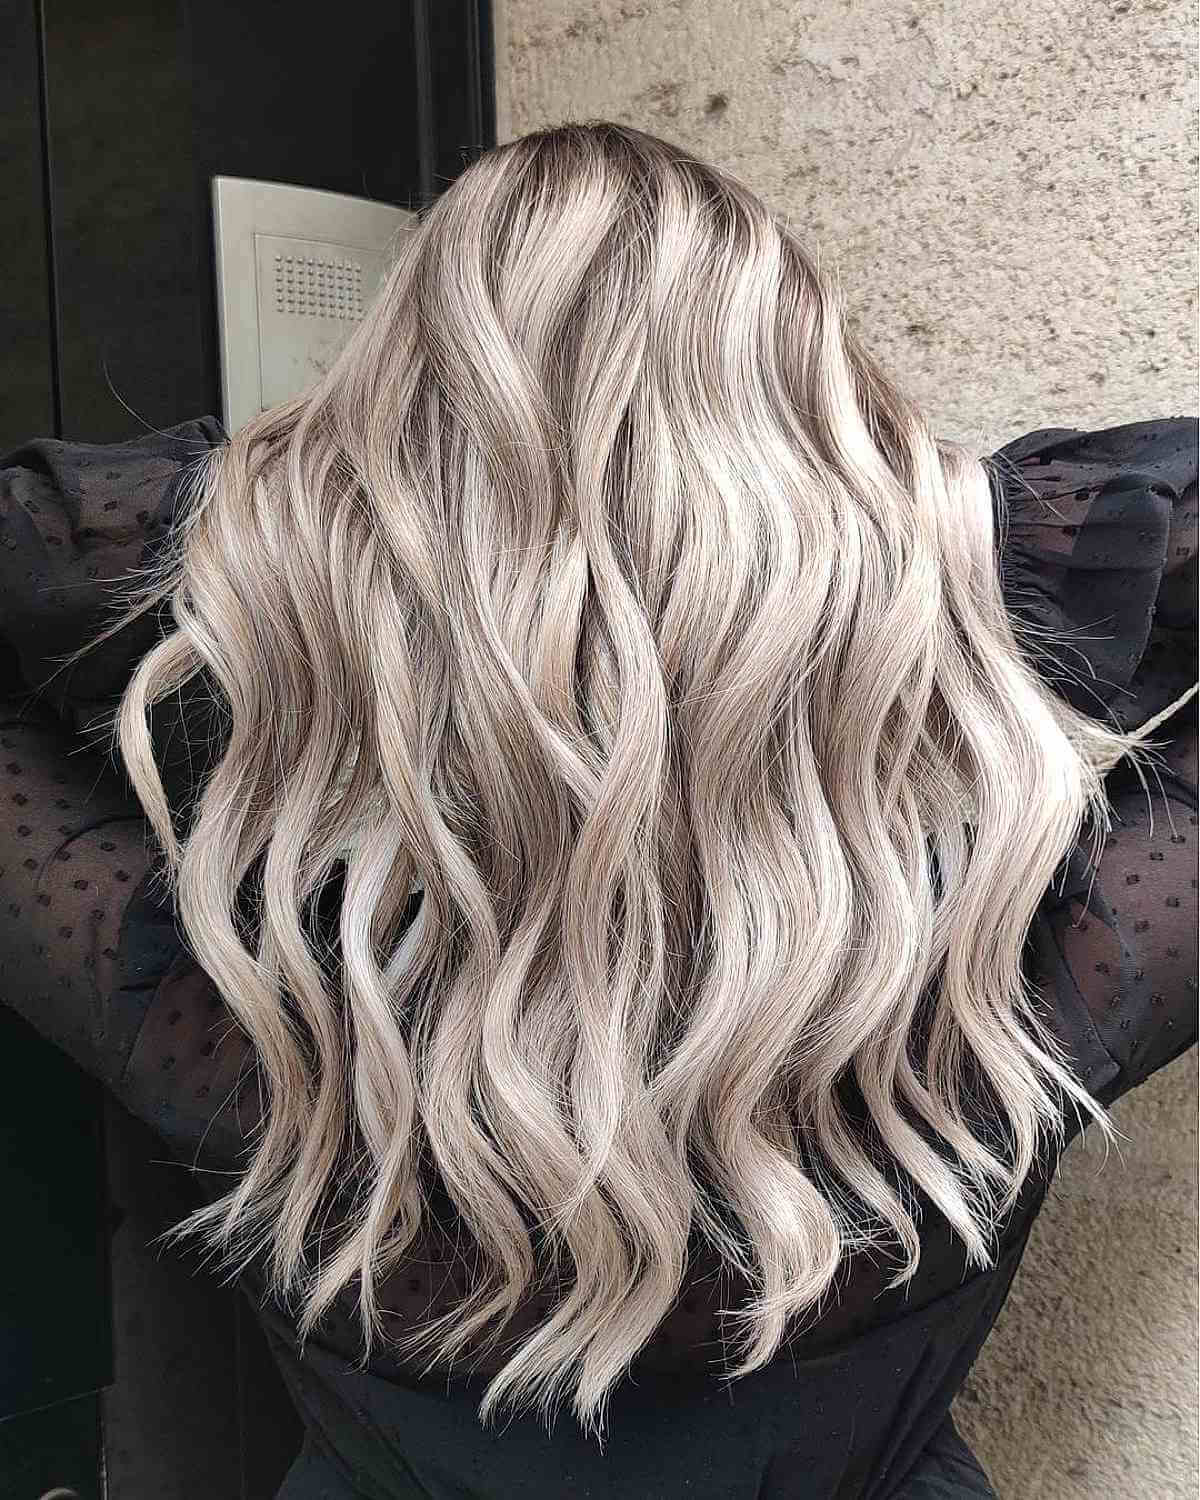 38 Stunning Balayage Hair Color Ideas for a Natural Look